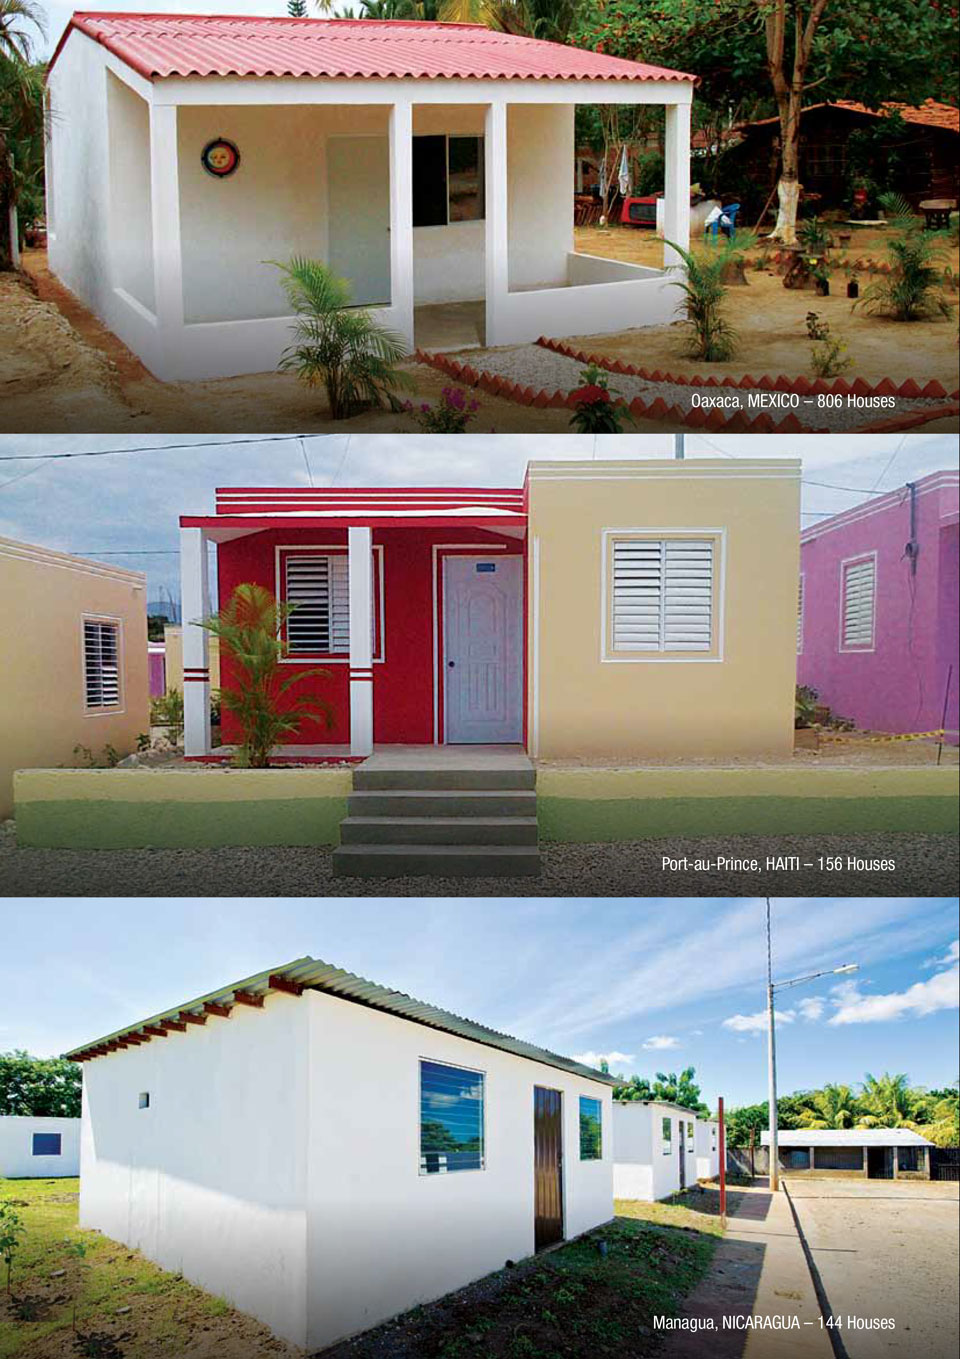 An image showing some of the projects CEMEX has done with the Disaster Relief Housing solution.